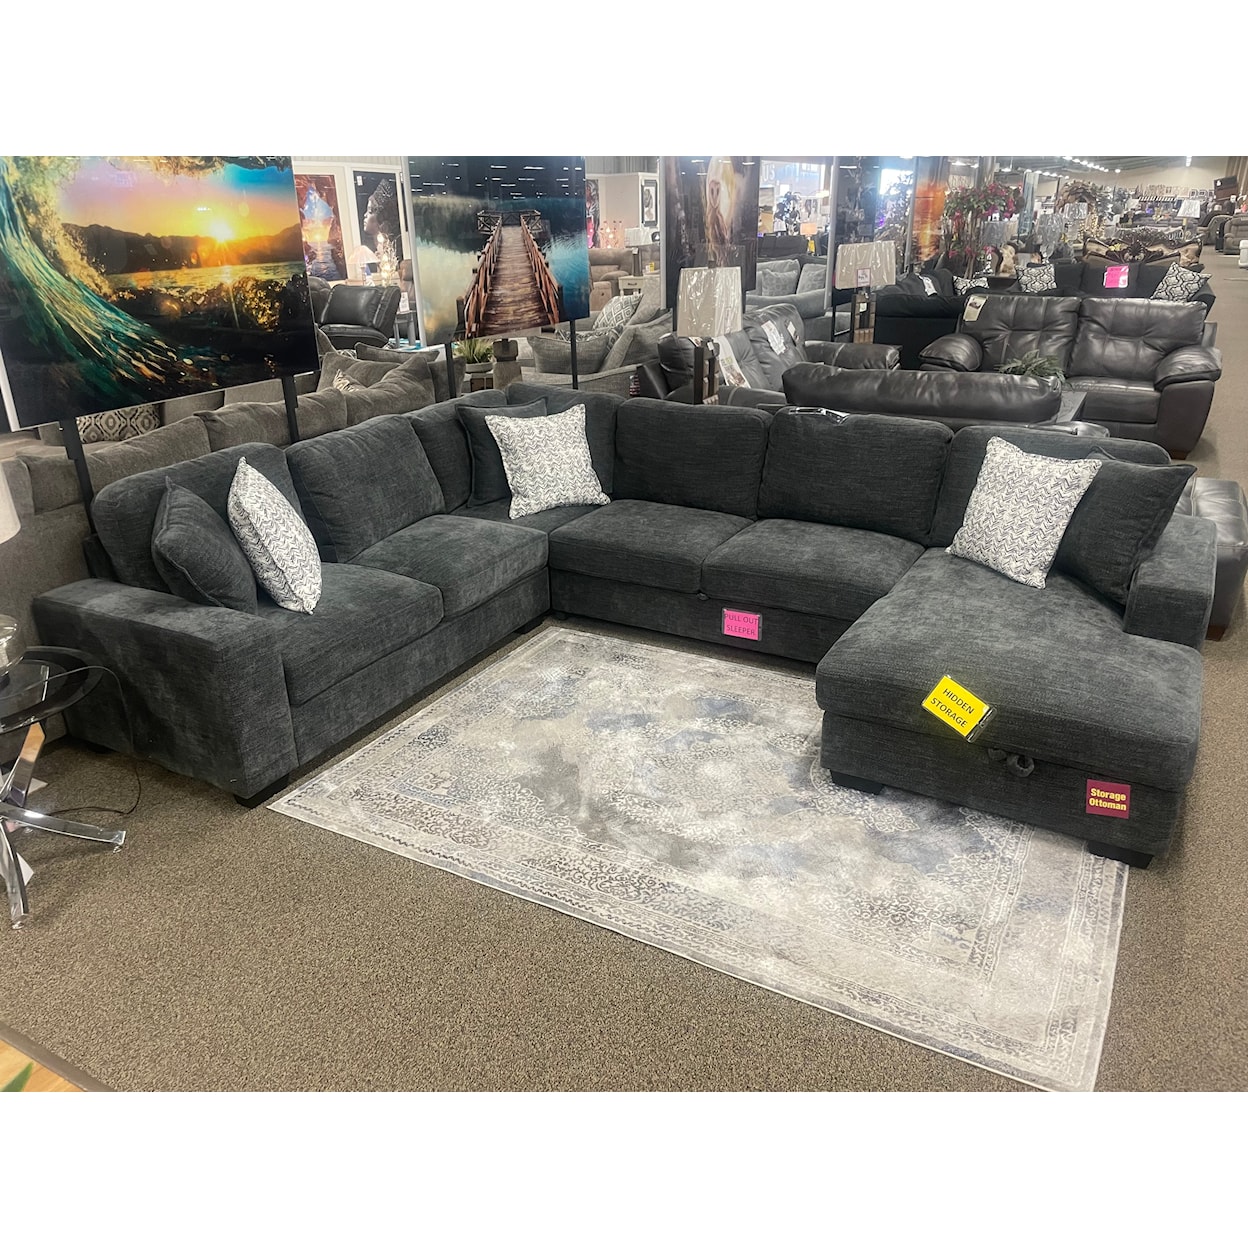 Lifestyle Andrew ANDREW CHARCOAL 4 PIECE SLEEPER | SECTIONAL